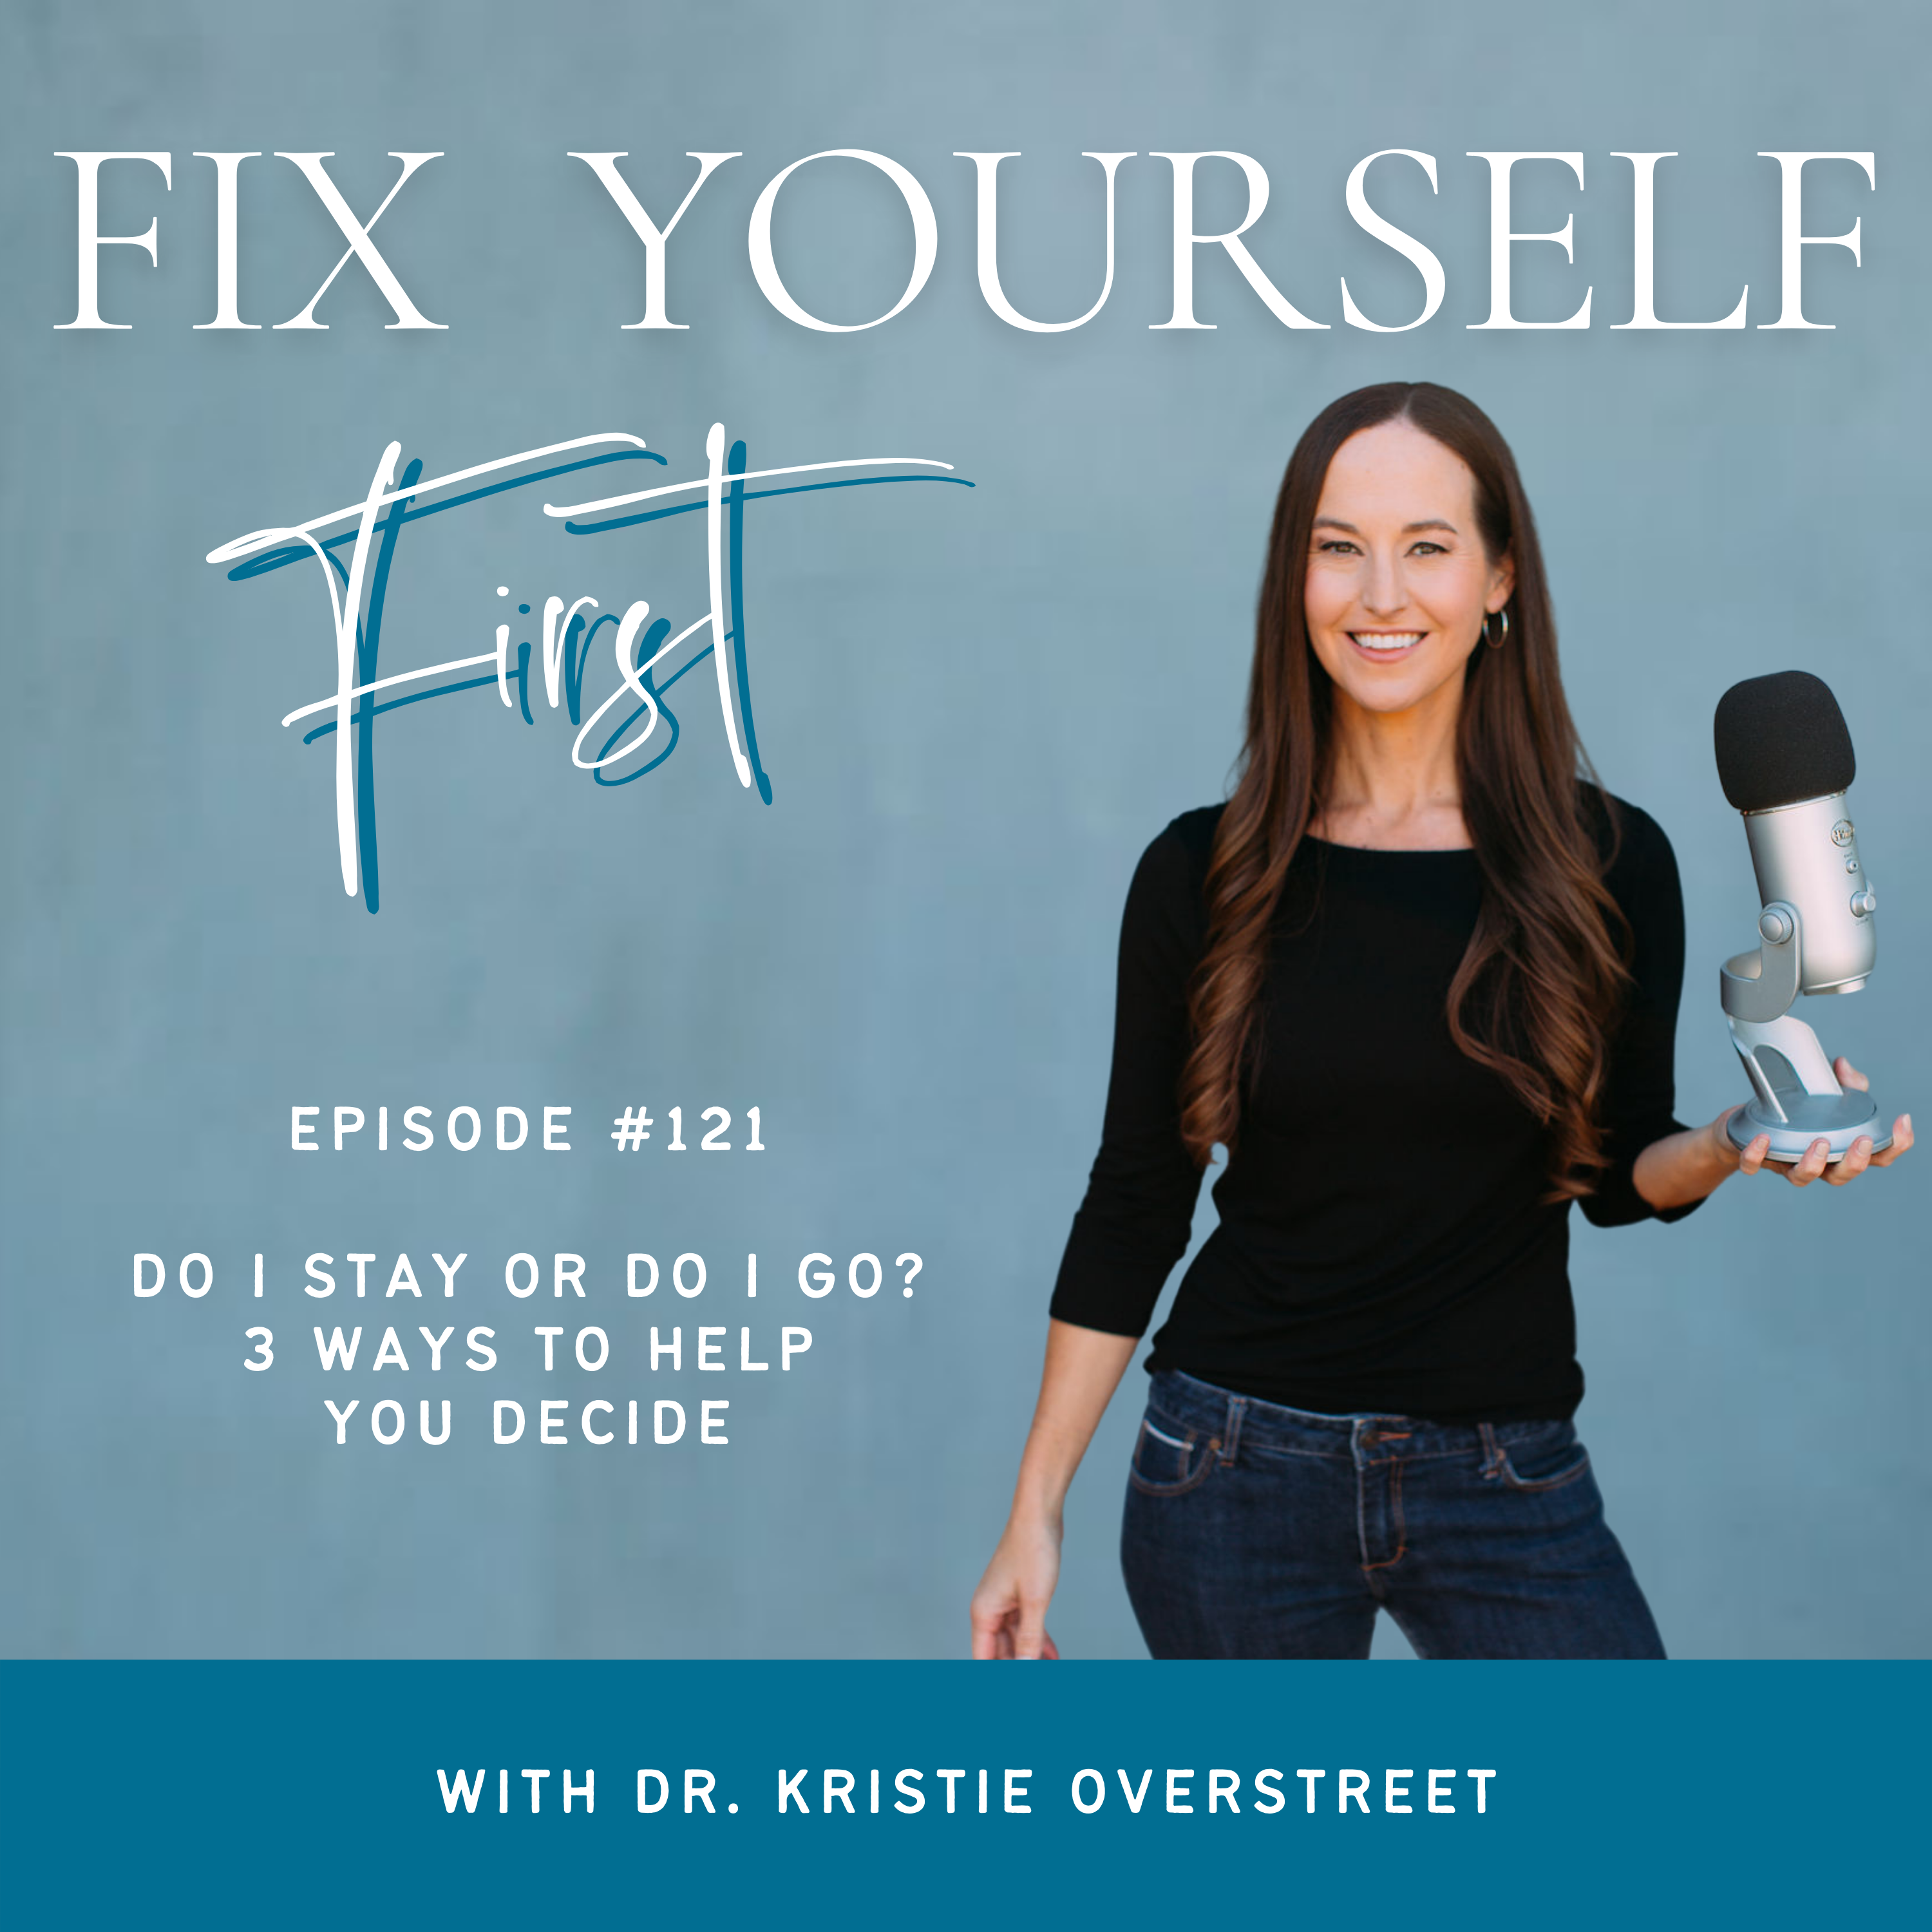 Fix Yourself First Episode 121 Do I Stay or Do I Go? 3 Ways to Help You Decide